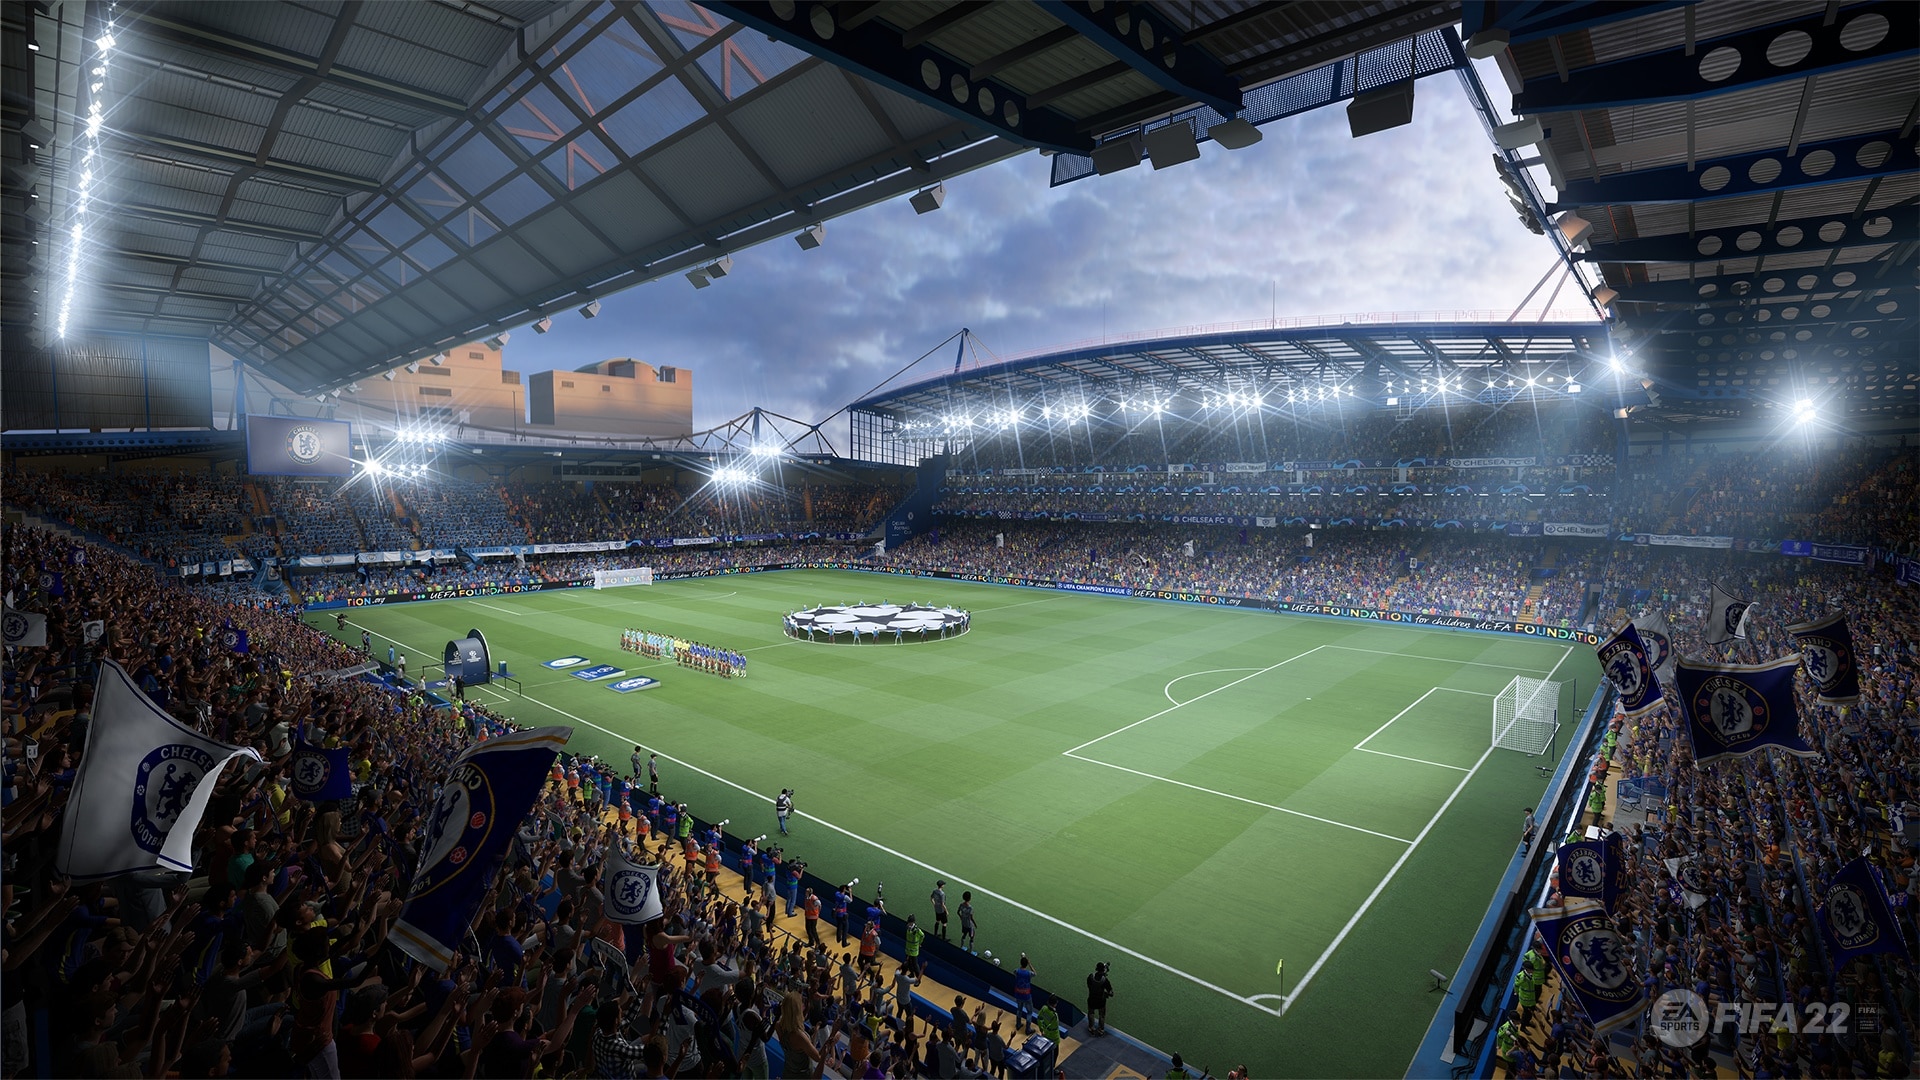 In FIFA 22 there are again many licensed stadiums. Here we see Stamford Bridge. The home ground of Chelsea FC.